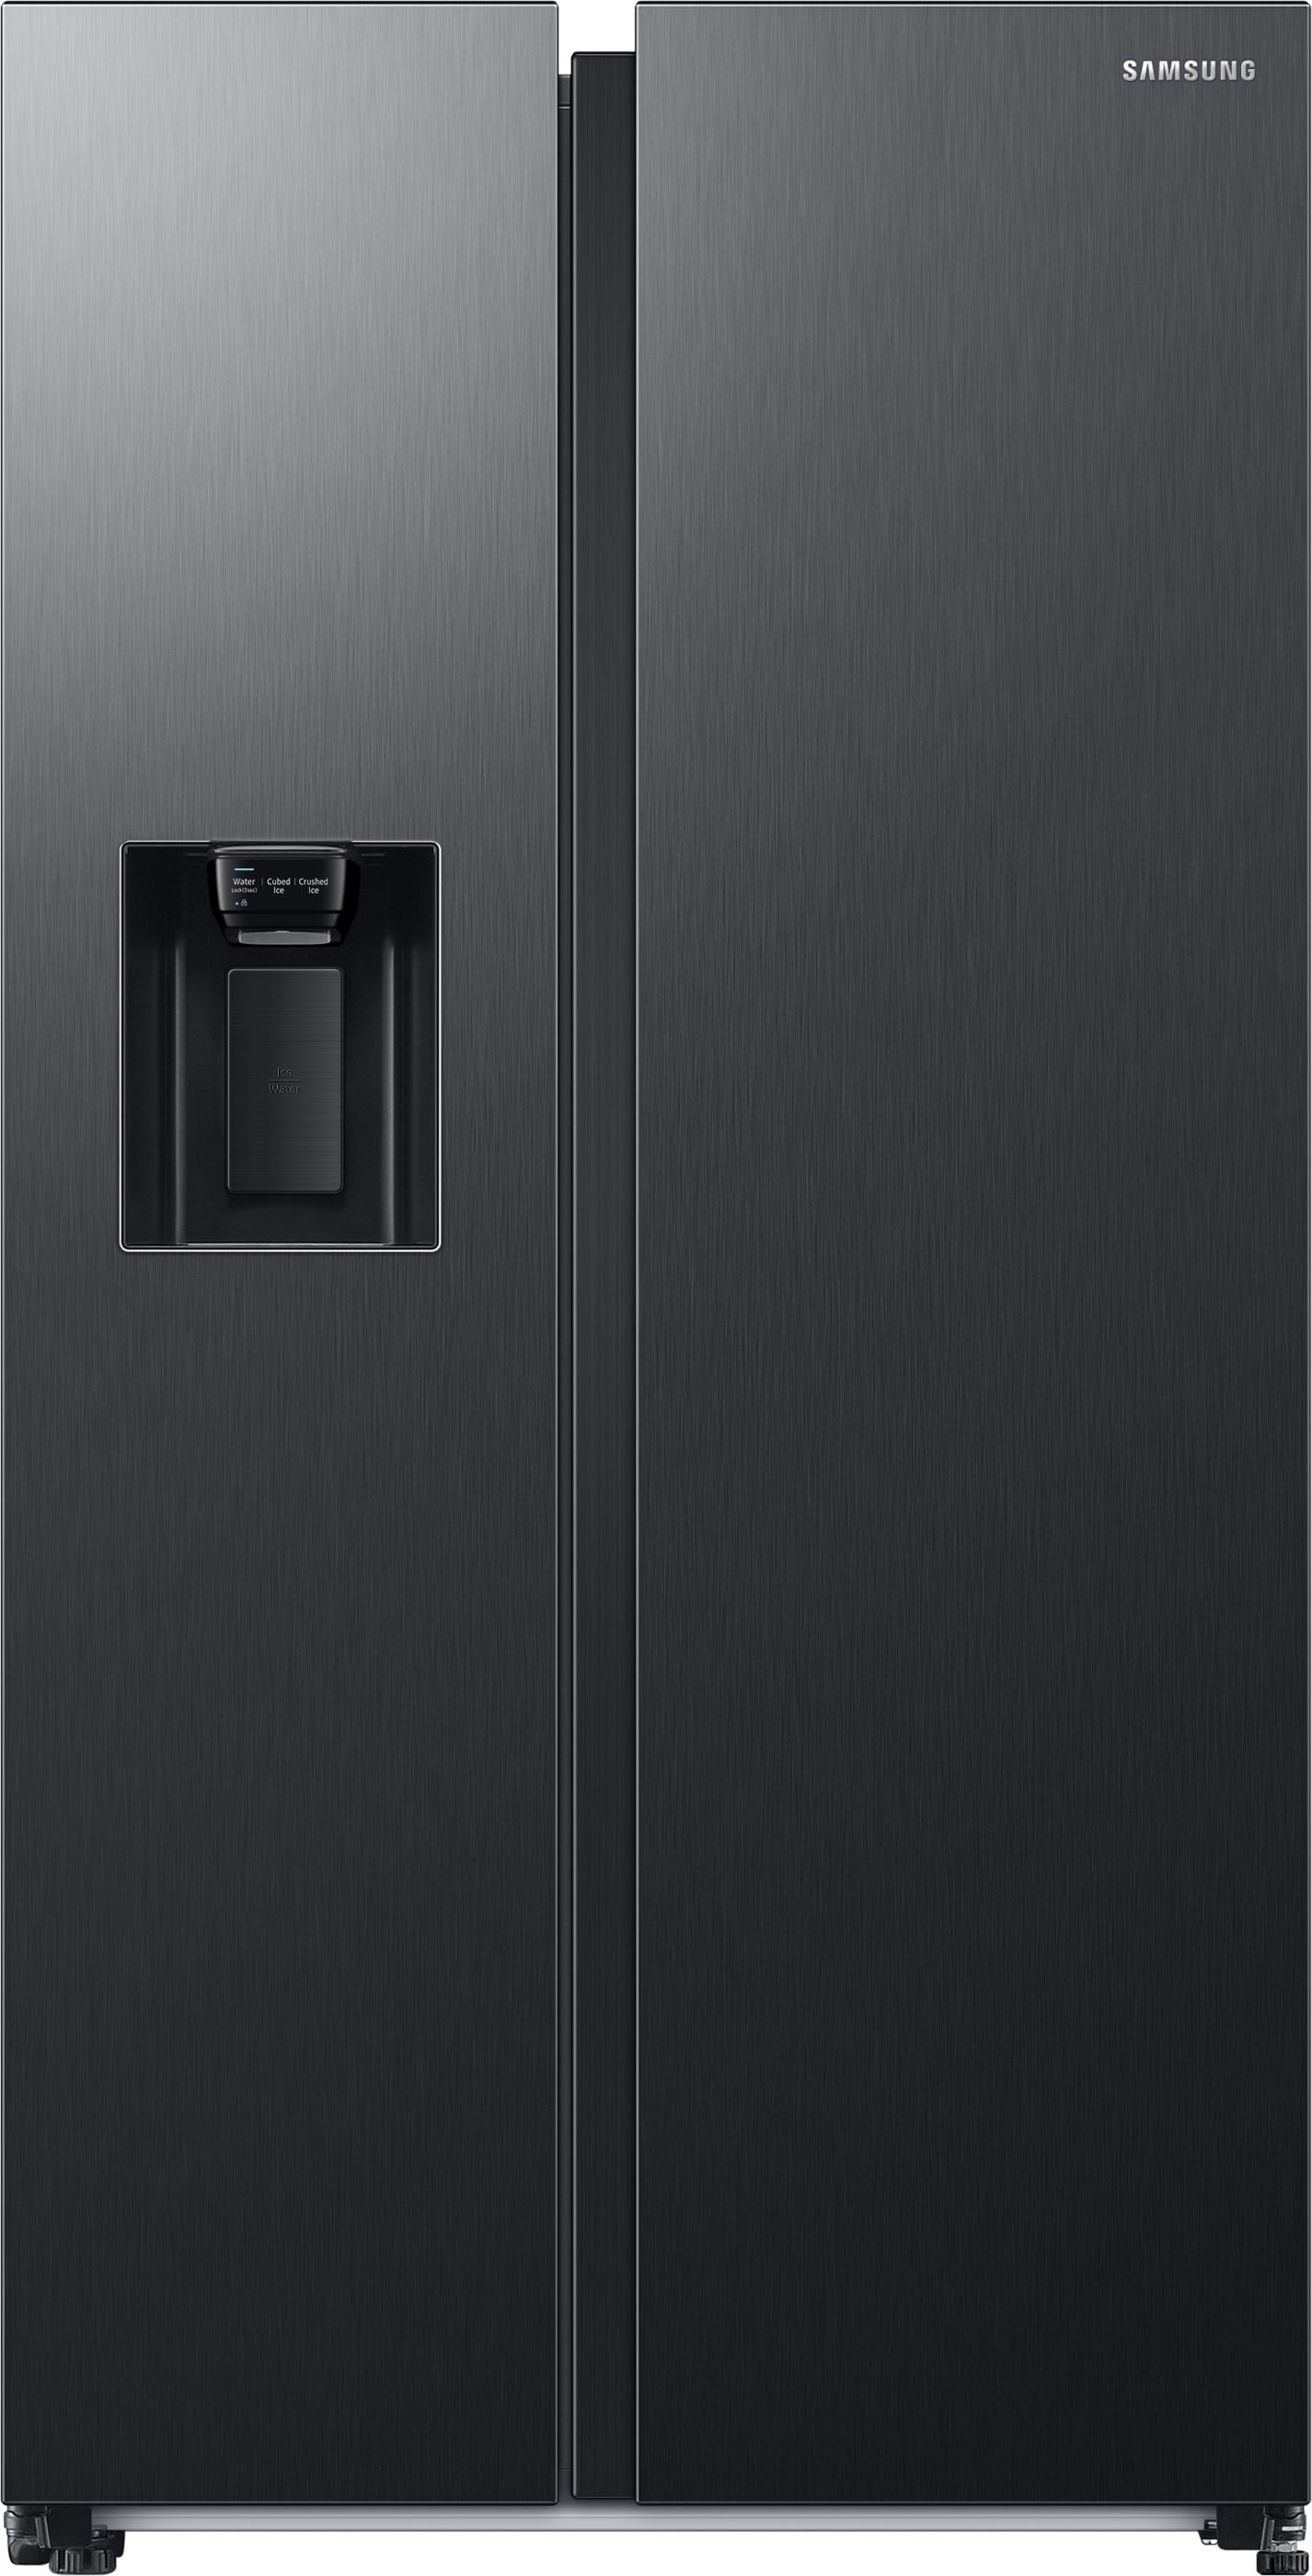 Samsung Series 8 RS68CG885EB1 Wifi Connected Plumbed Total No Frost American Fridge Freezer - Black / Stainless Steel - E Rated, Black